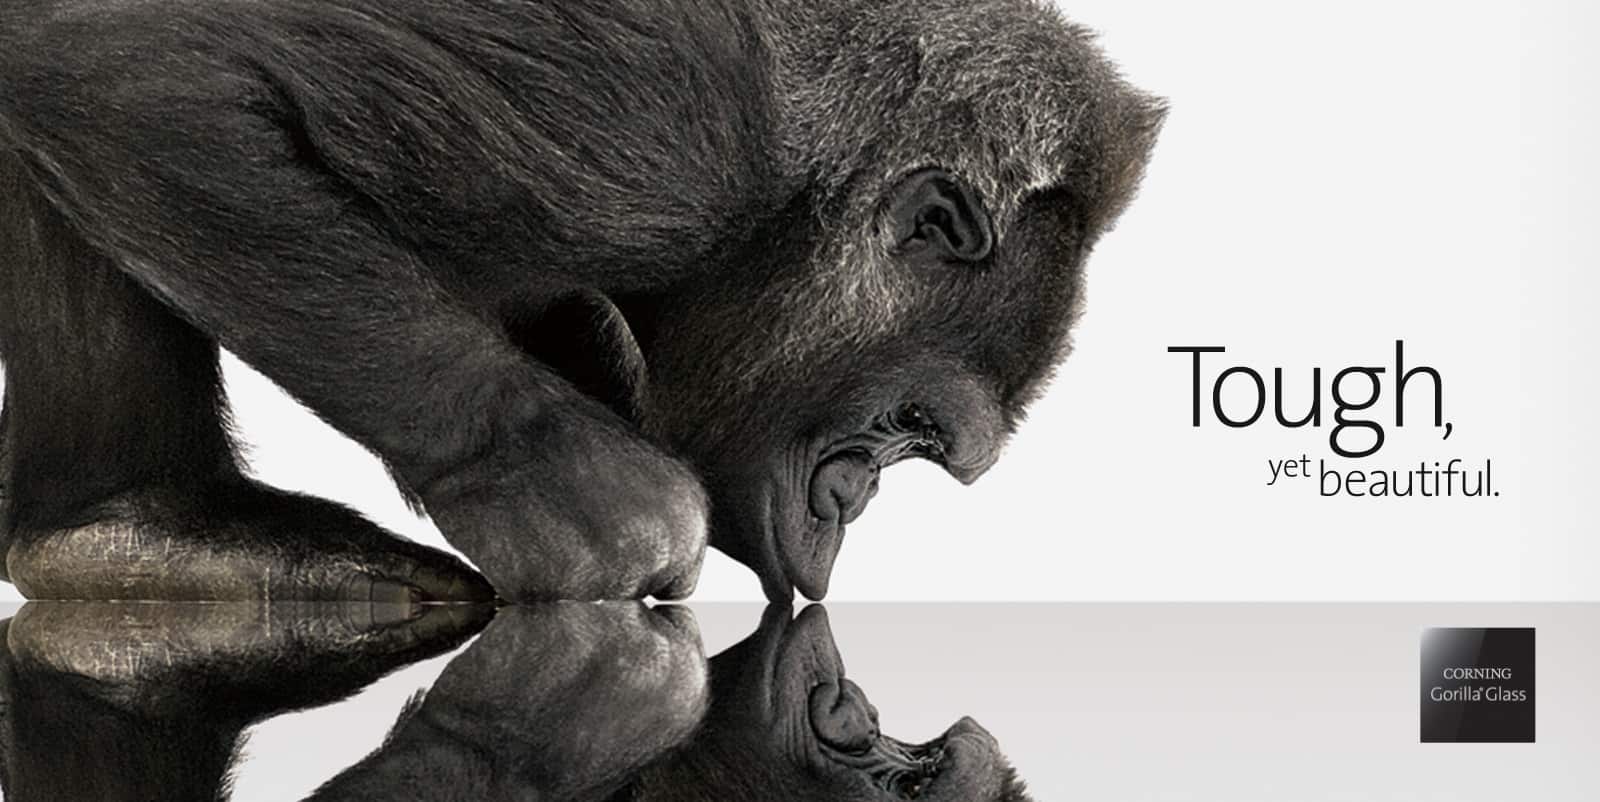 Corning's Gorilla Glass 6 can survive being dropped over a dozen times. Ape not included.